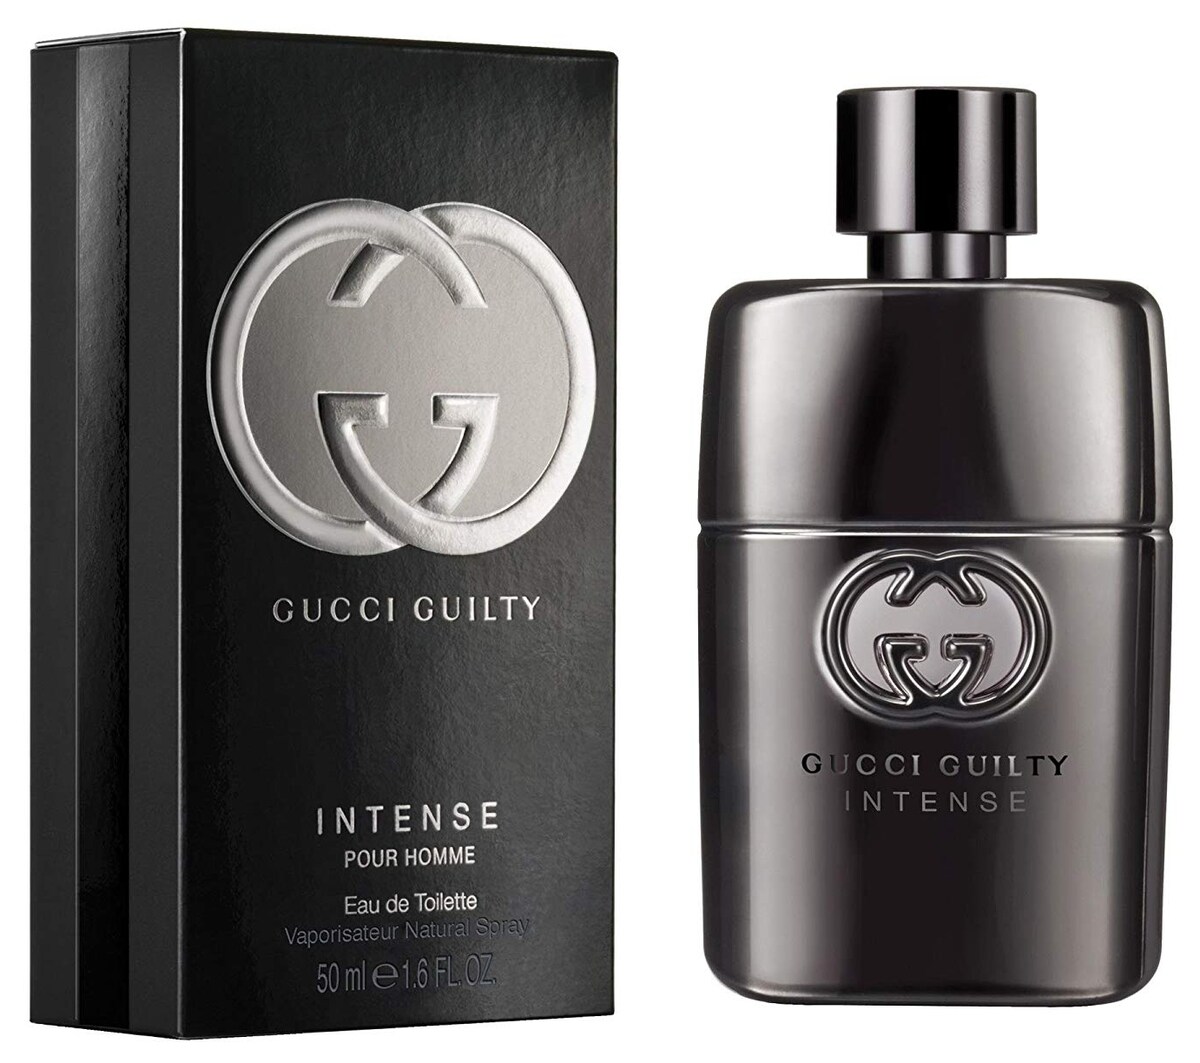 gucci guilty intense perfume price